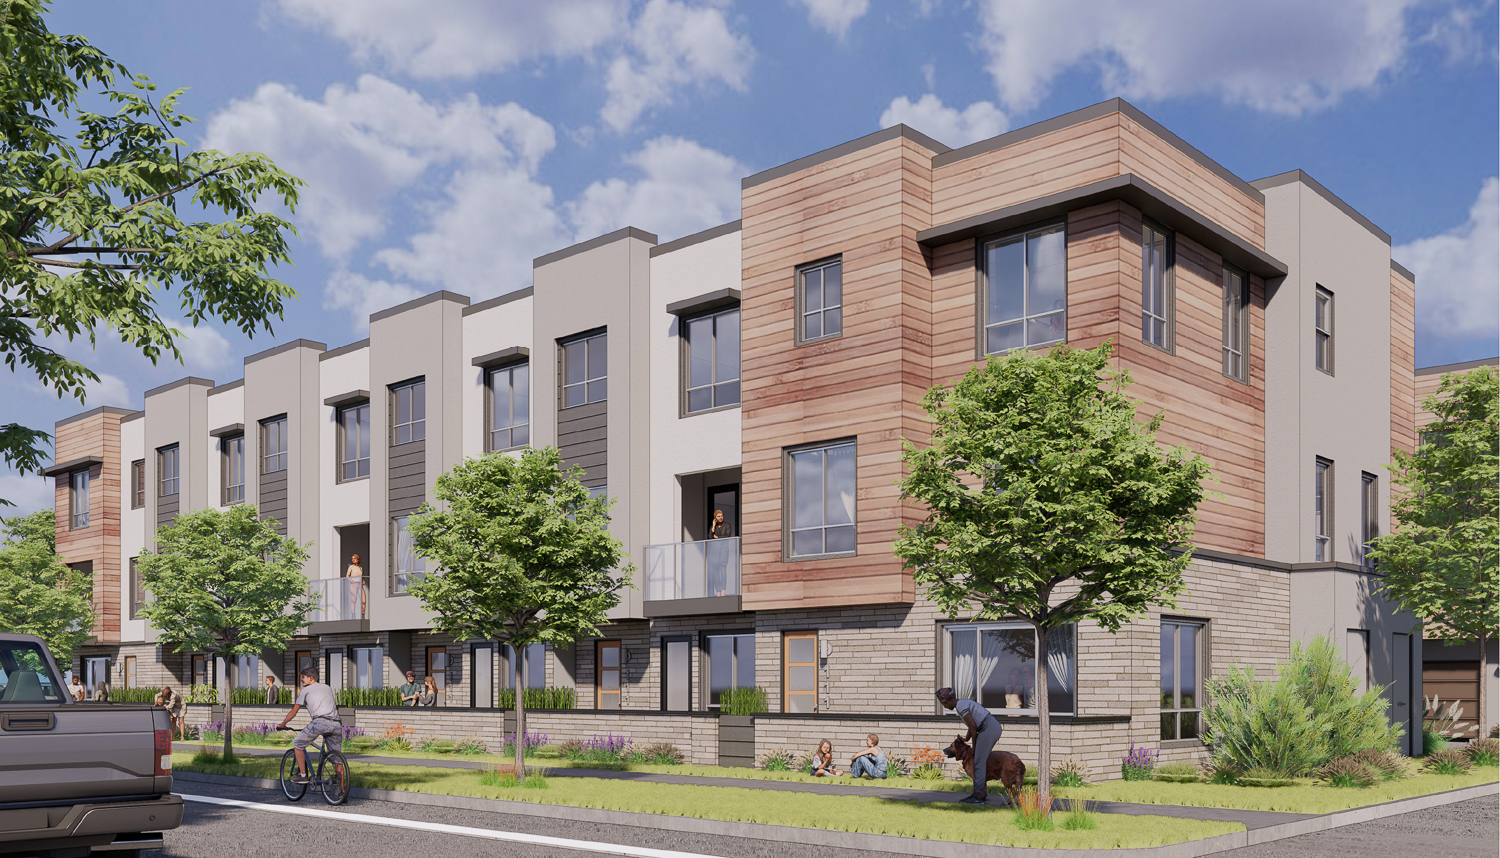 Sac Bee Townhomes pedestrian view, rendering by TCA Architects